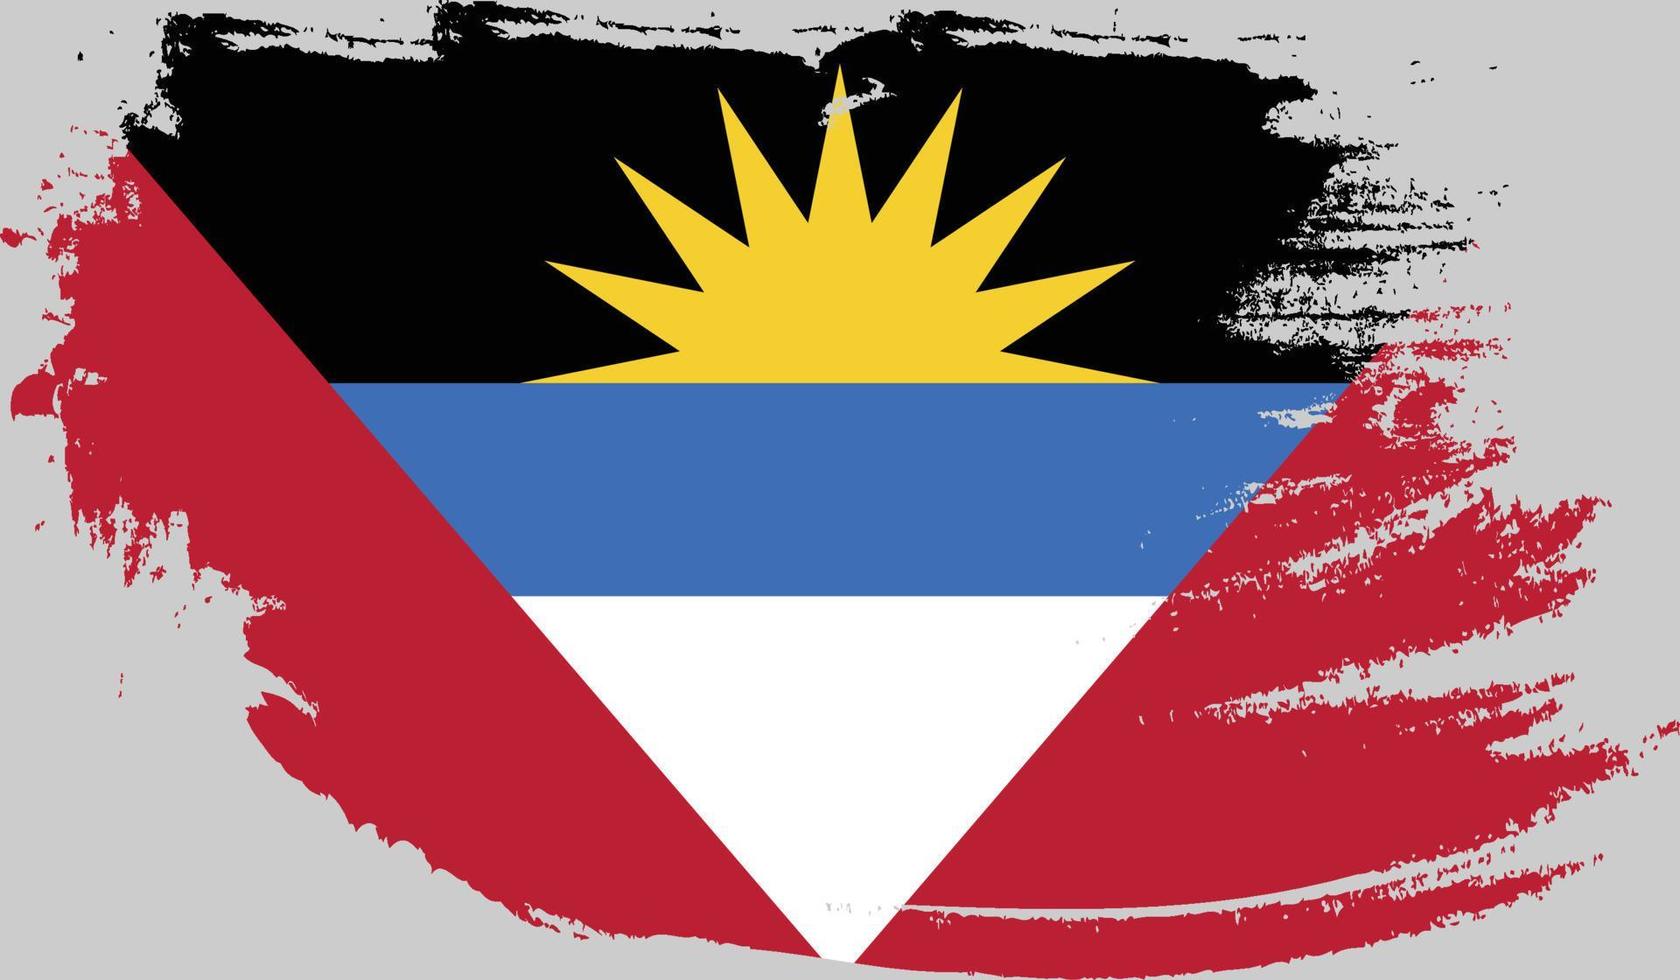 Antigua and Barbuda flag with grunge texture vector